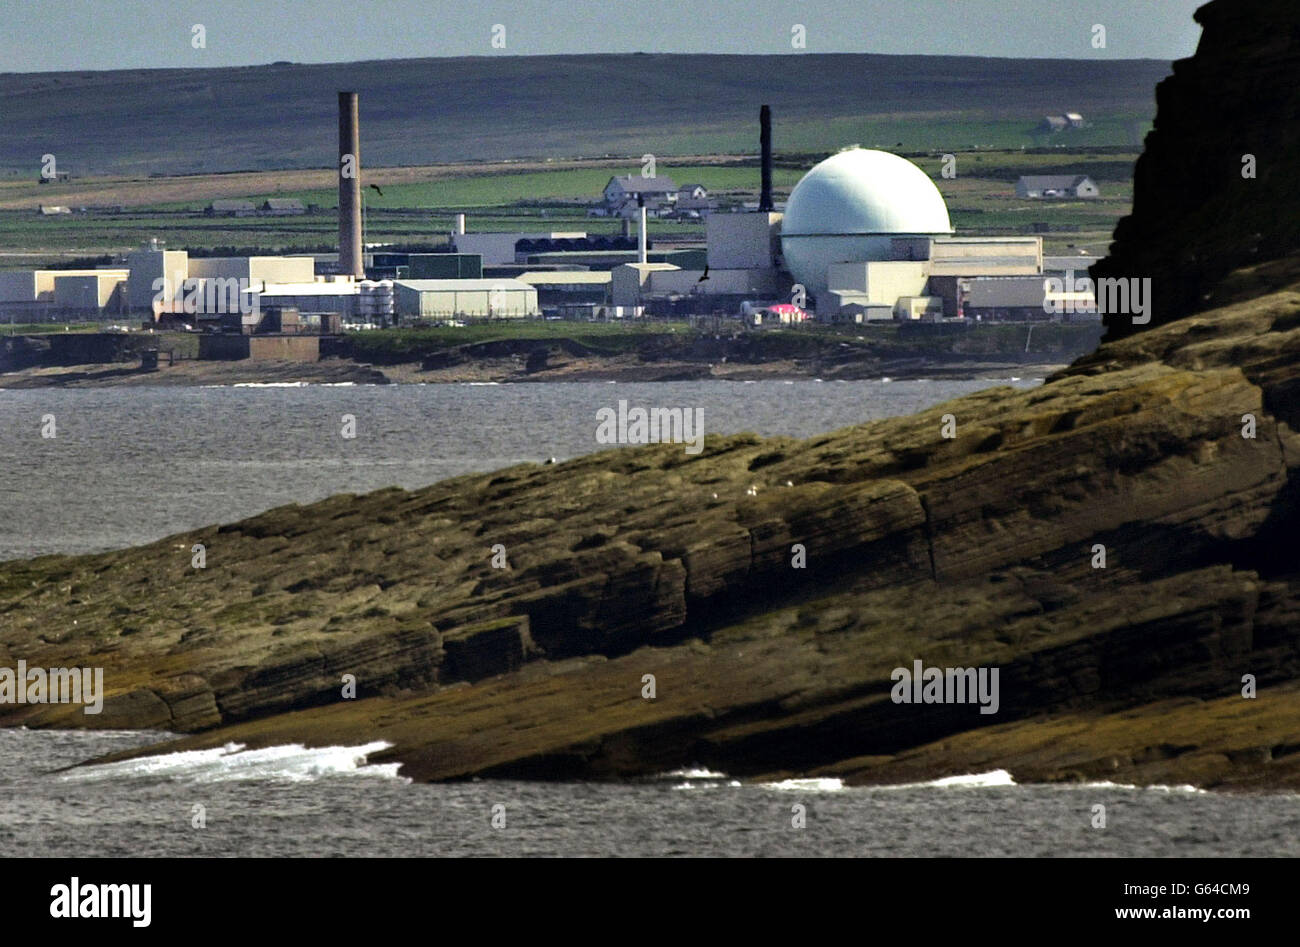 The UK Atomic Energy Authority (UKAEA) plant at Dounreay, near Caithness, where investigations were continuing to establish how 20 workers were contaminated with radioactive particles. * The alarm was raised after radiation was detected on the shoes of one worker. Two members of staff in the D2001 plant were found to have contaminated particles on their hands, while one of the pair also had particles on the face: radioactive dust was found on the shoes of a further 18 workers following the incident. Stock Photo